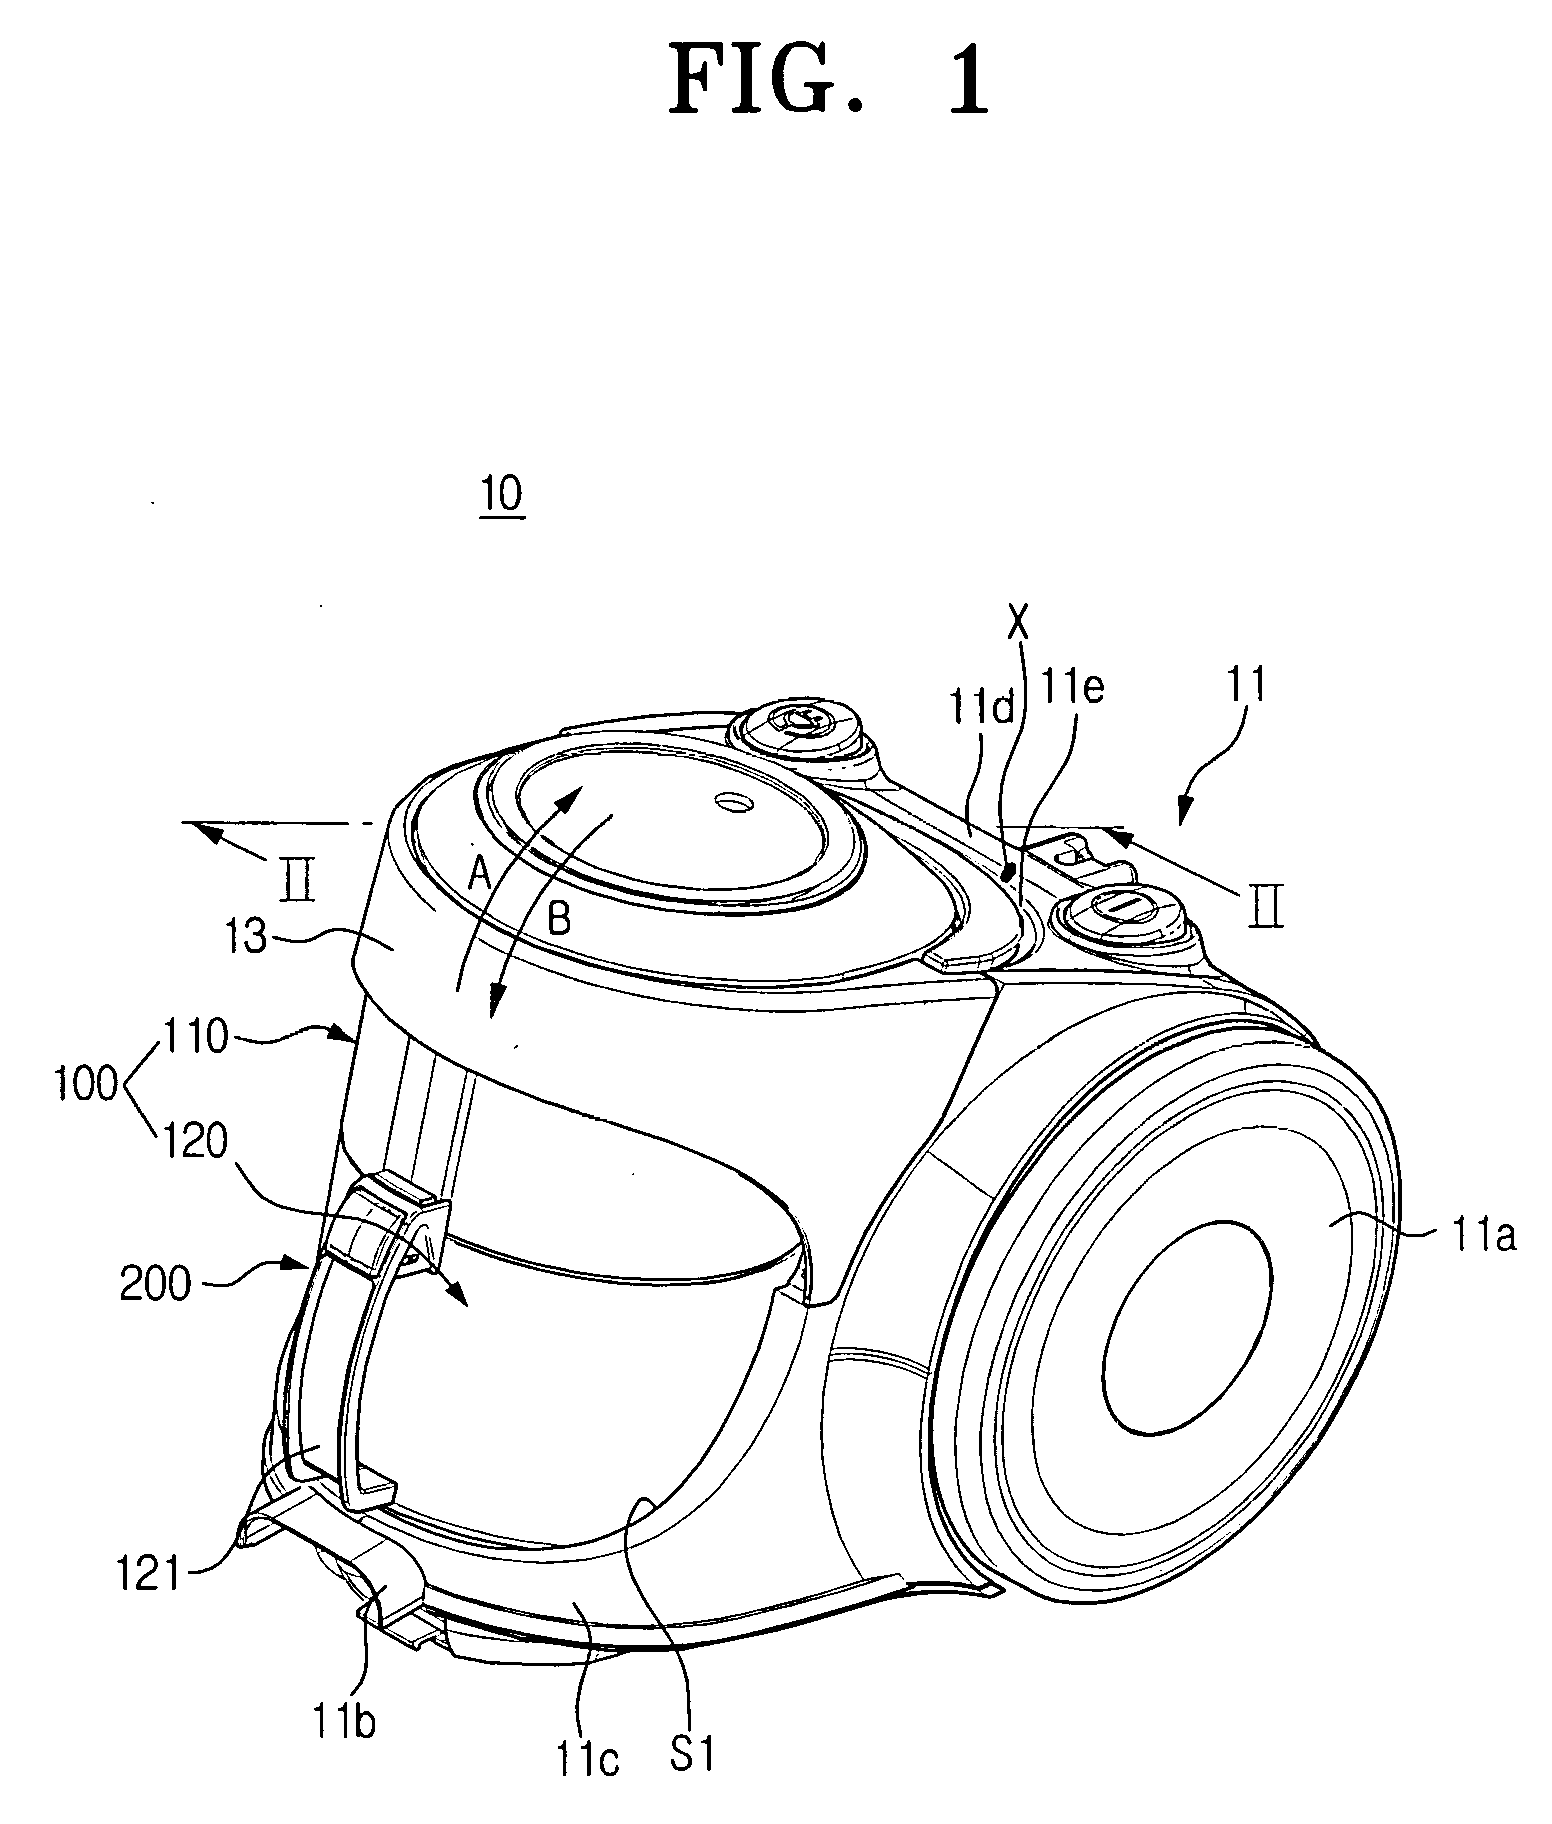 Vacuum cleaner having a cyclone dust collecting apparatus